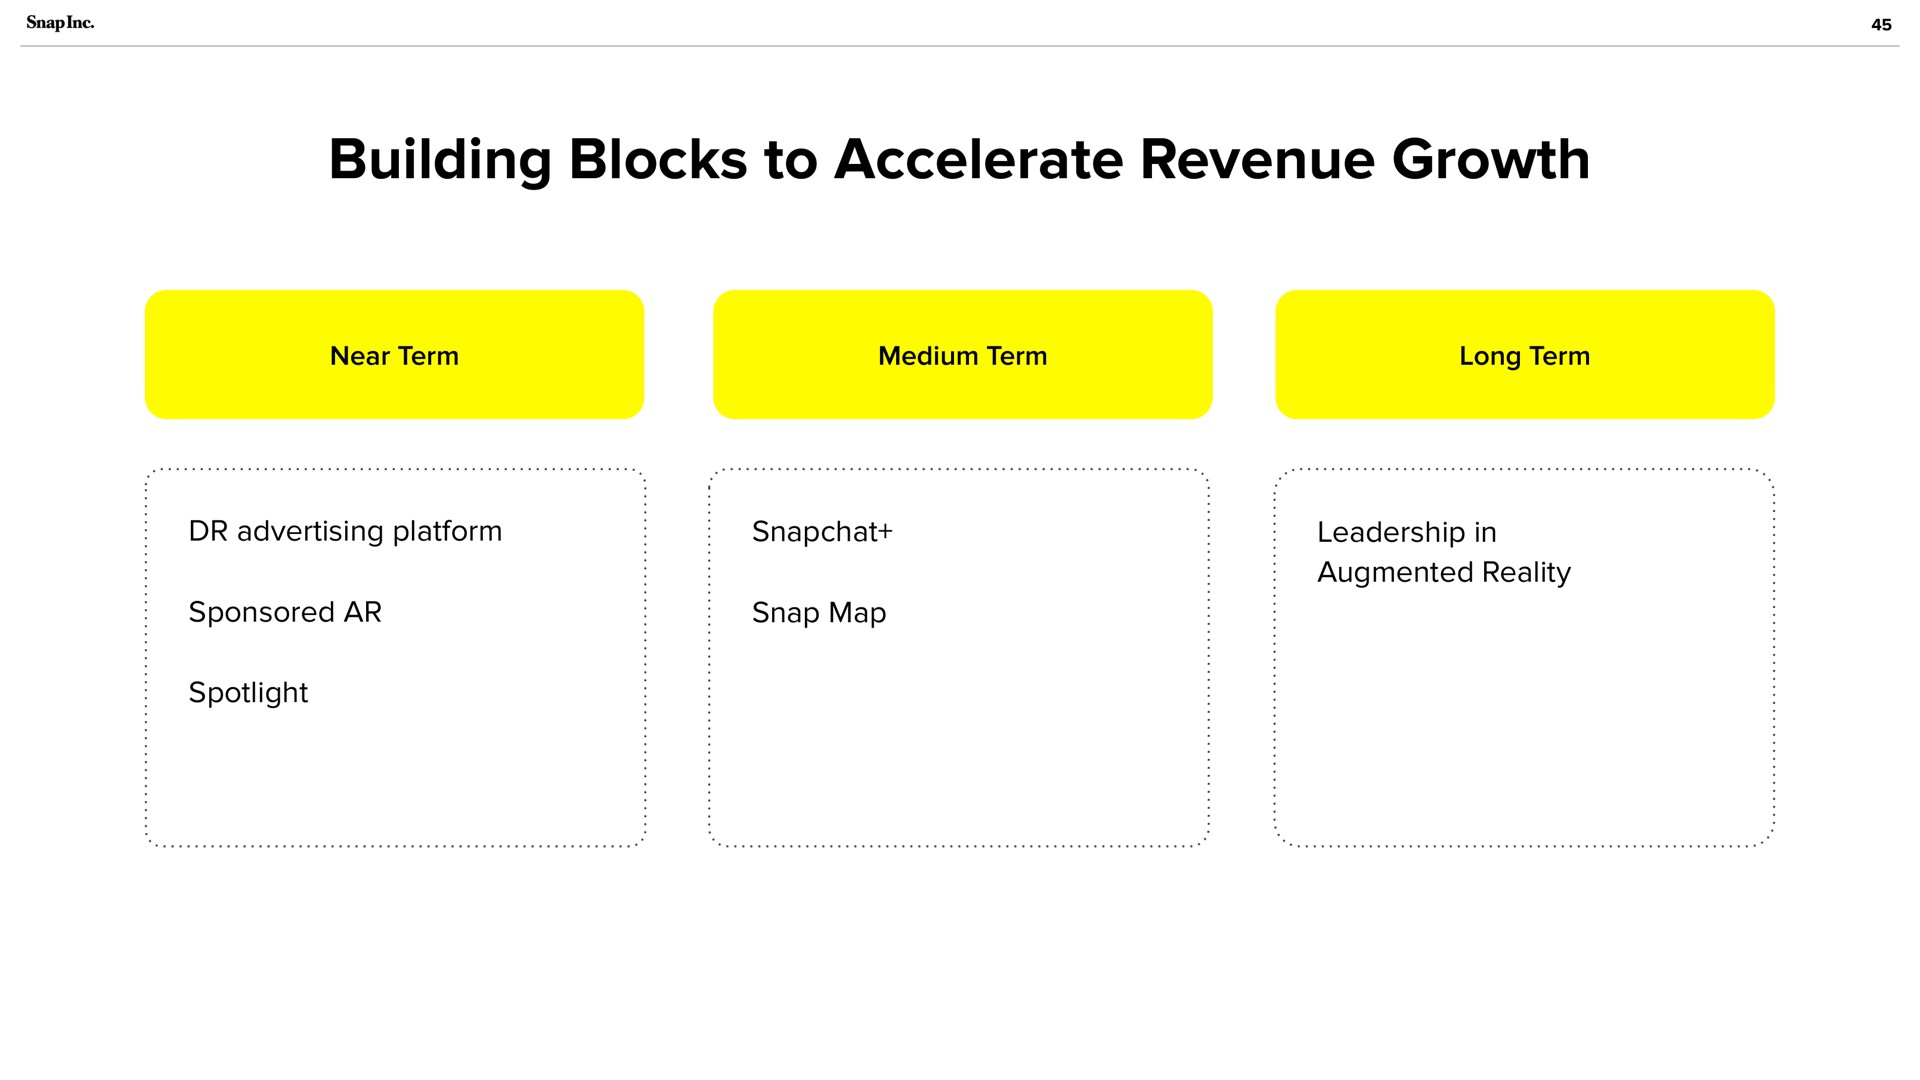 building blocks to accelerate revenue growth | Snap Inc